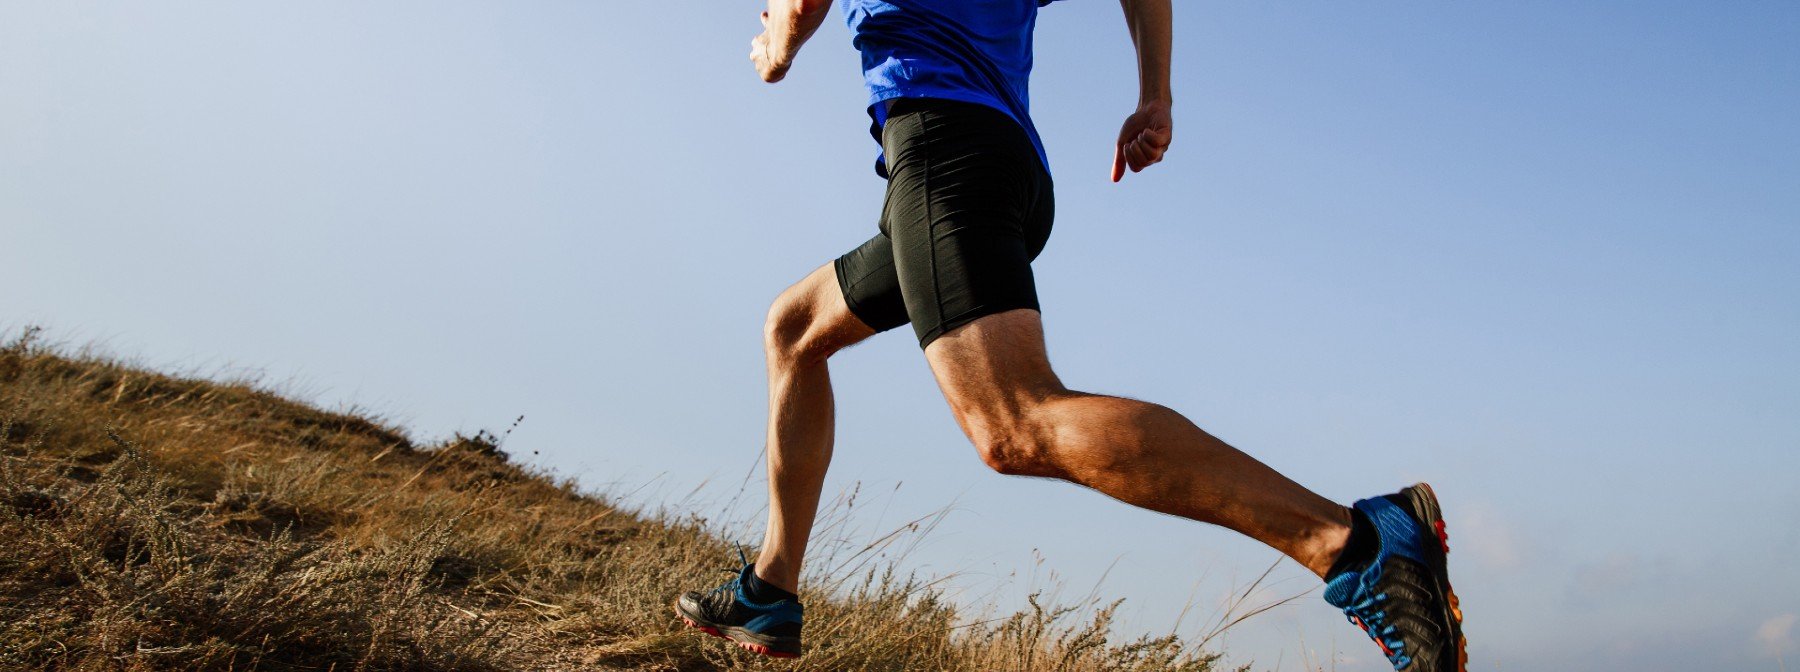 Why You Should Run This Summer